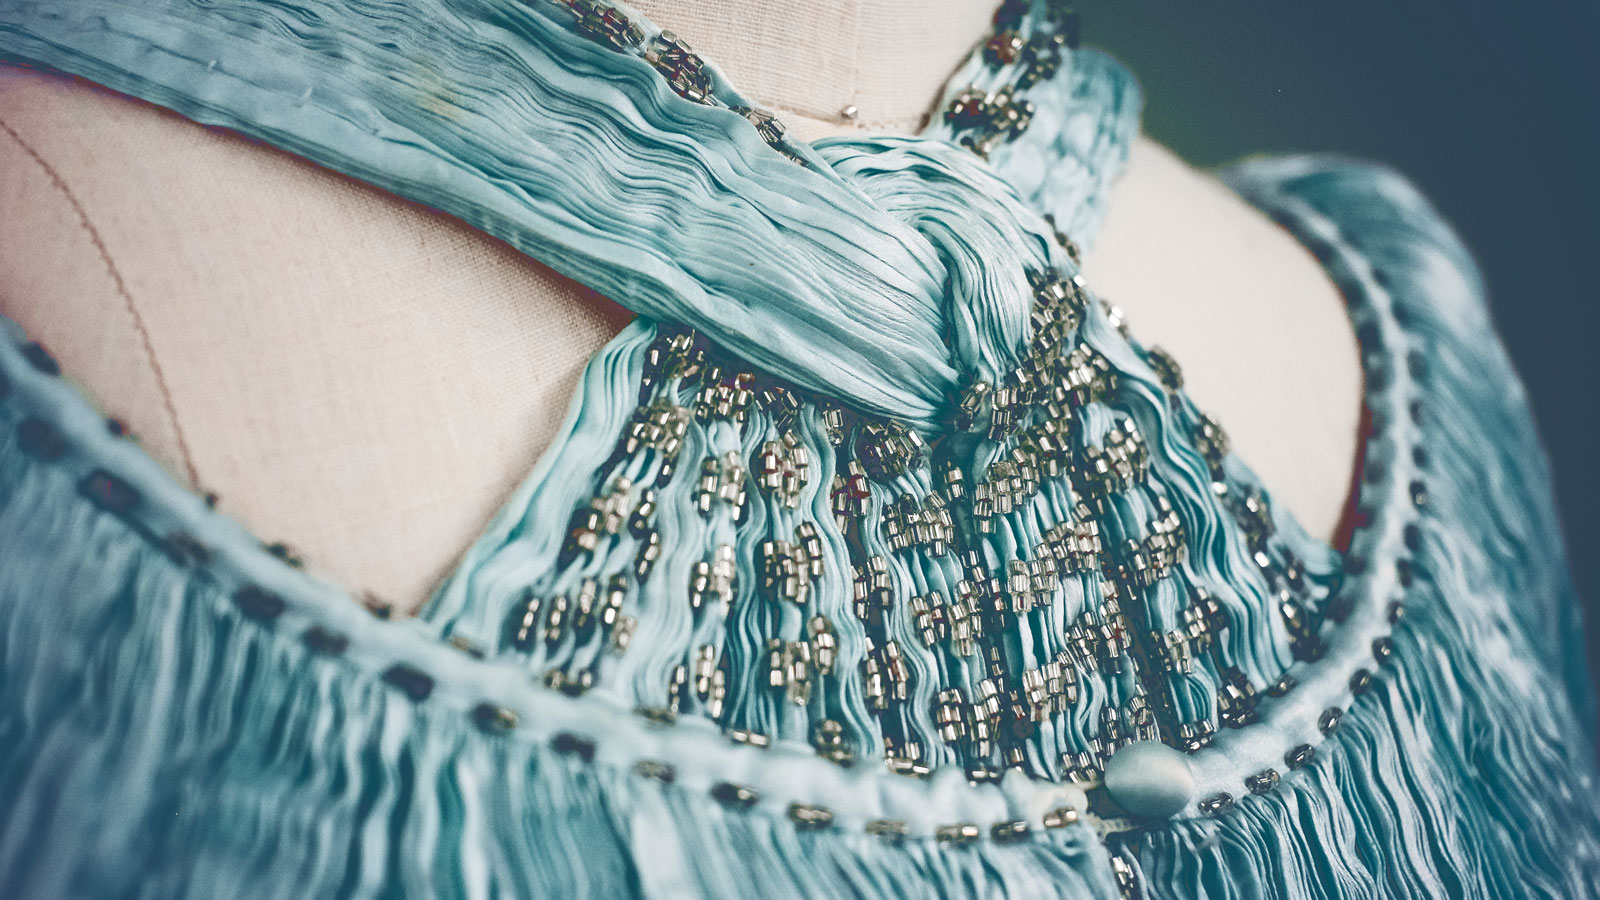 A knotted, halter-style collar of a vintage woven blue dress with silver charms in the threads.